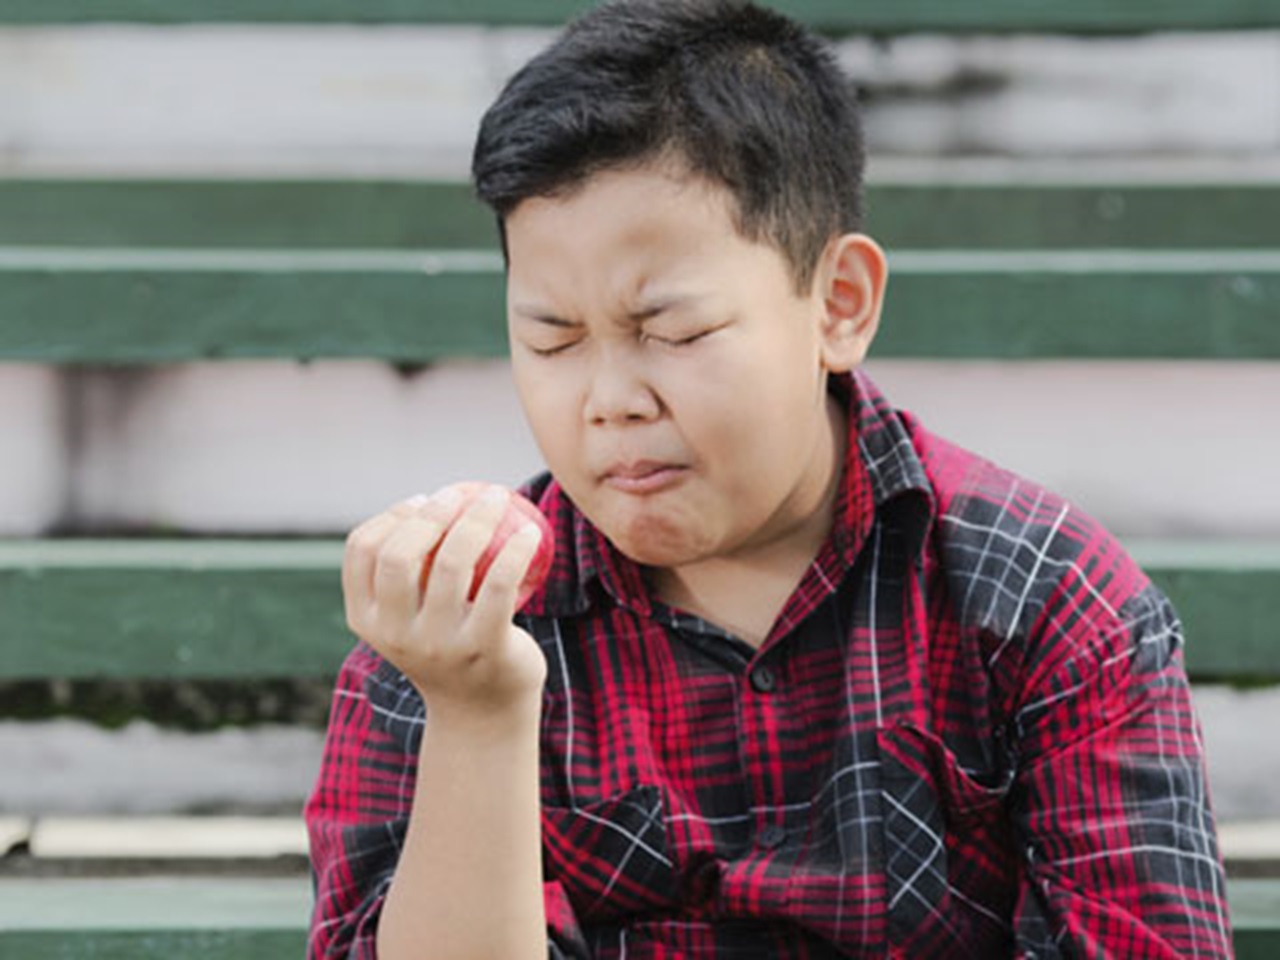 Boy winces while eating an apple